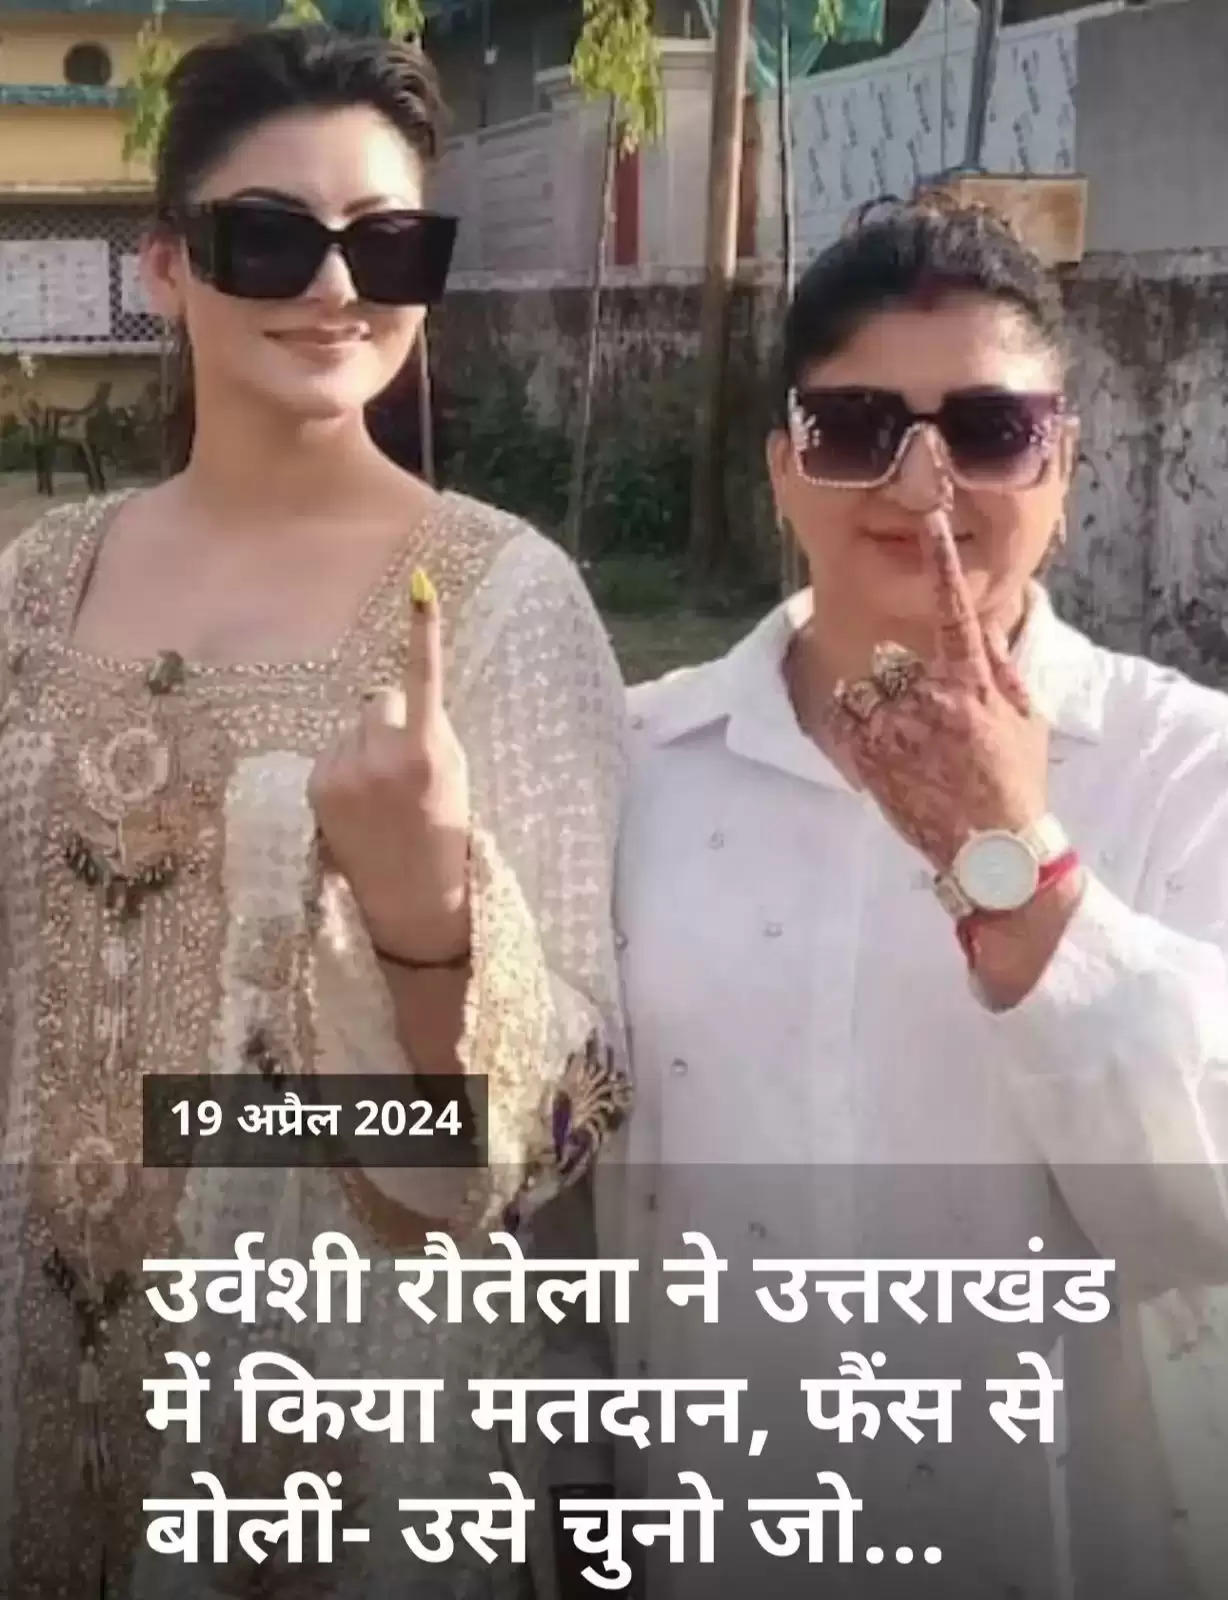 Uttarakhand for the ongoing Lok Sabha Elections 2024, shares a special message for the future of Indian democracy after casting her vote early in the morning at 6:45am !